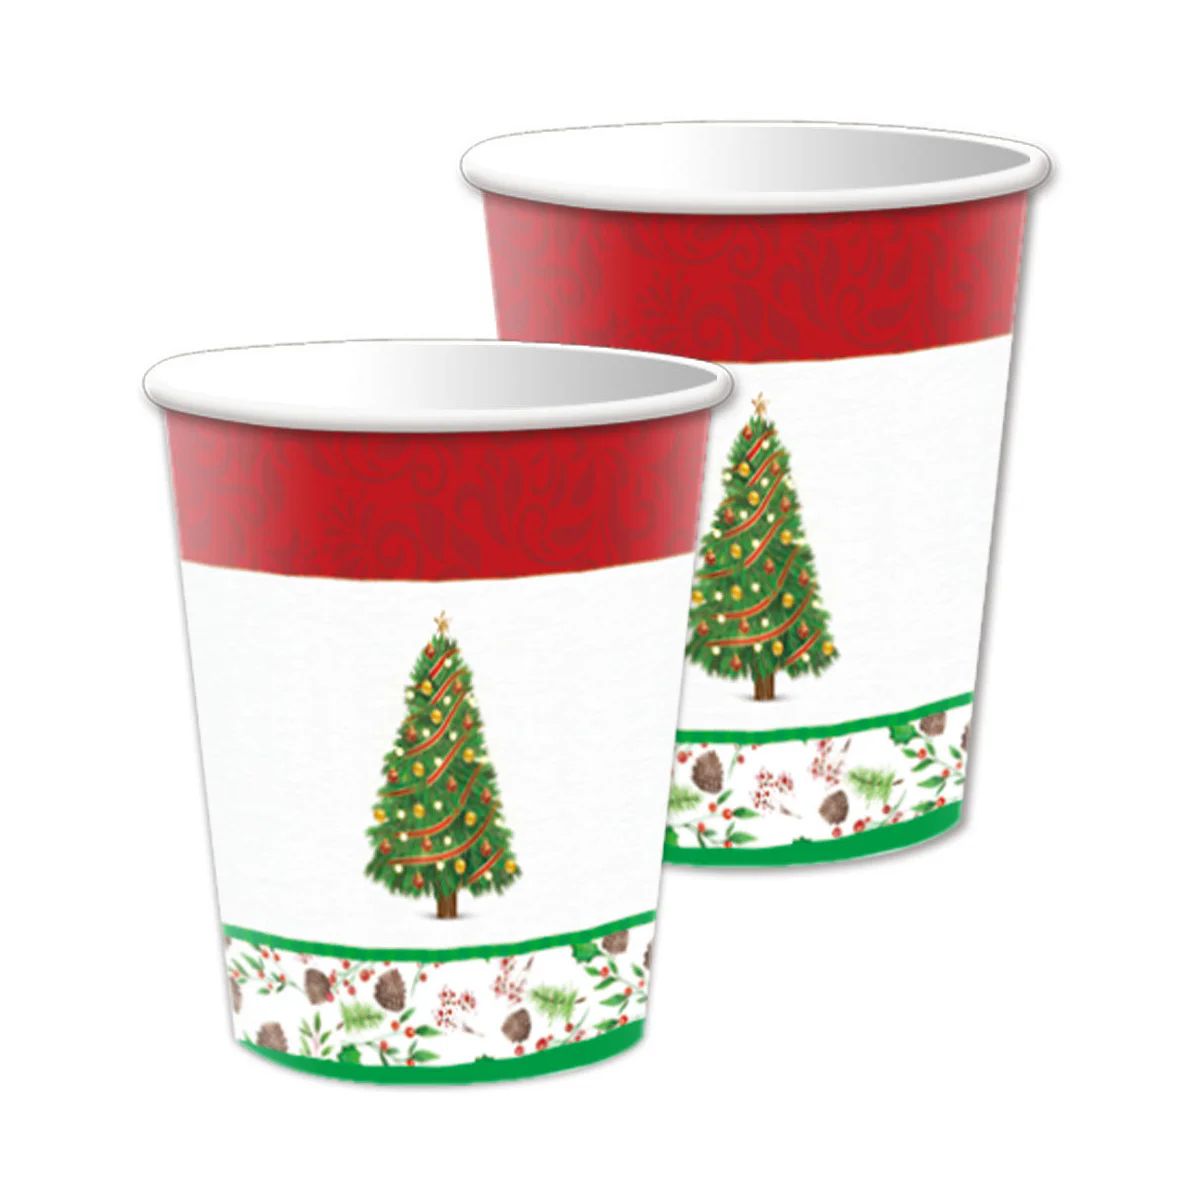 Wholesale Footwear Christmas Tree Paper Cups 10 Count